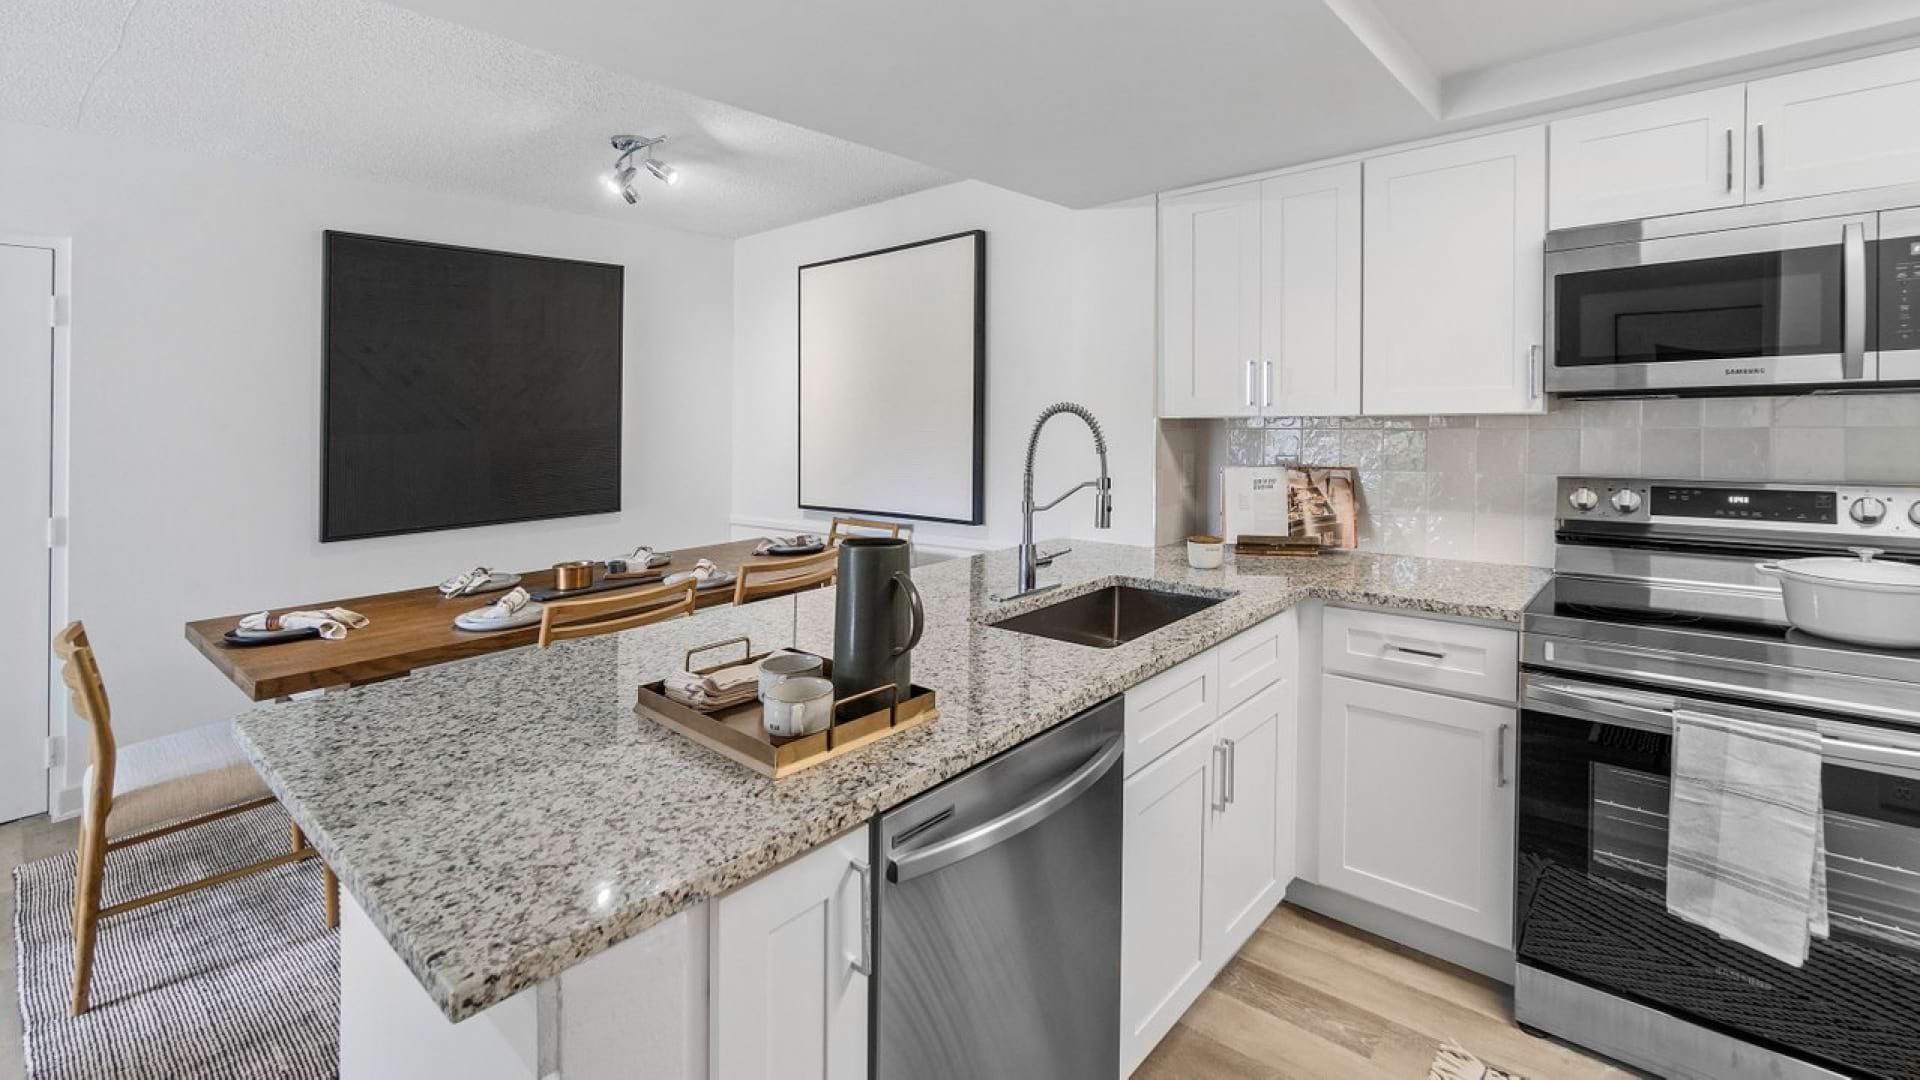 Luxury Kitchen with Energy-Efficient, Stainless Steel Appliances at Our Kendall, Miami Apartments for Rent